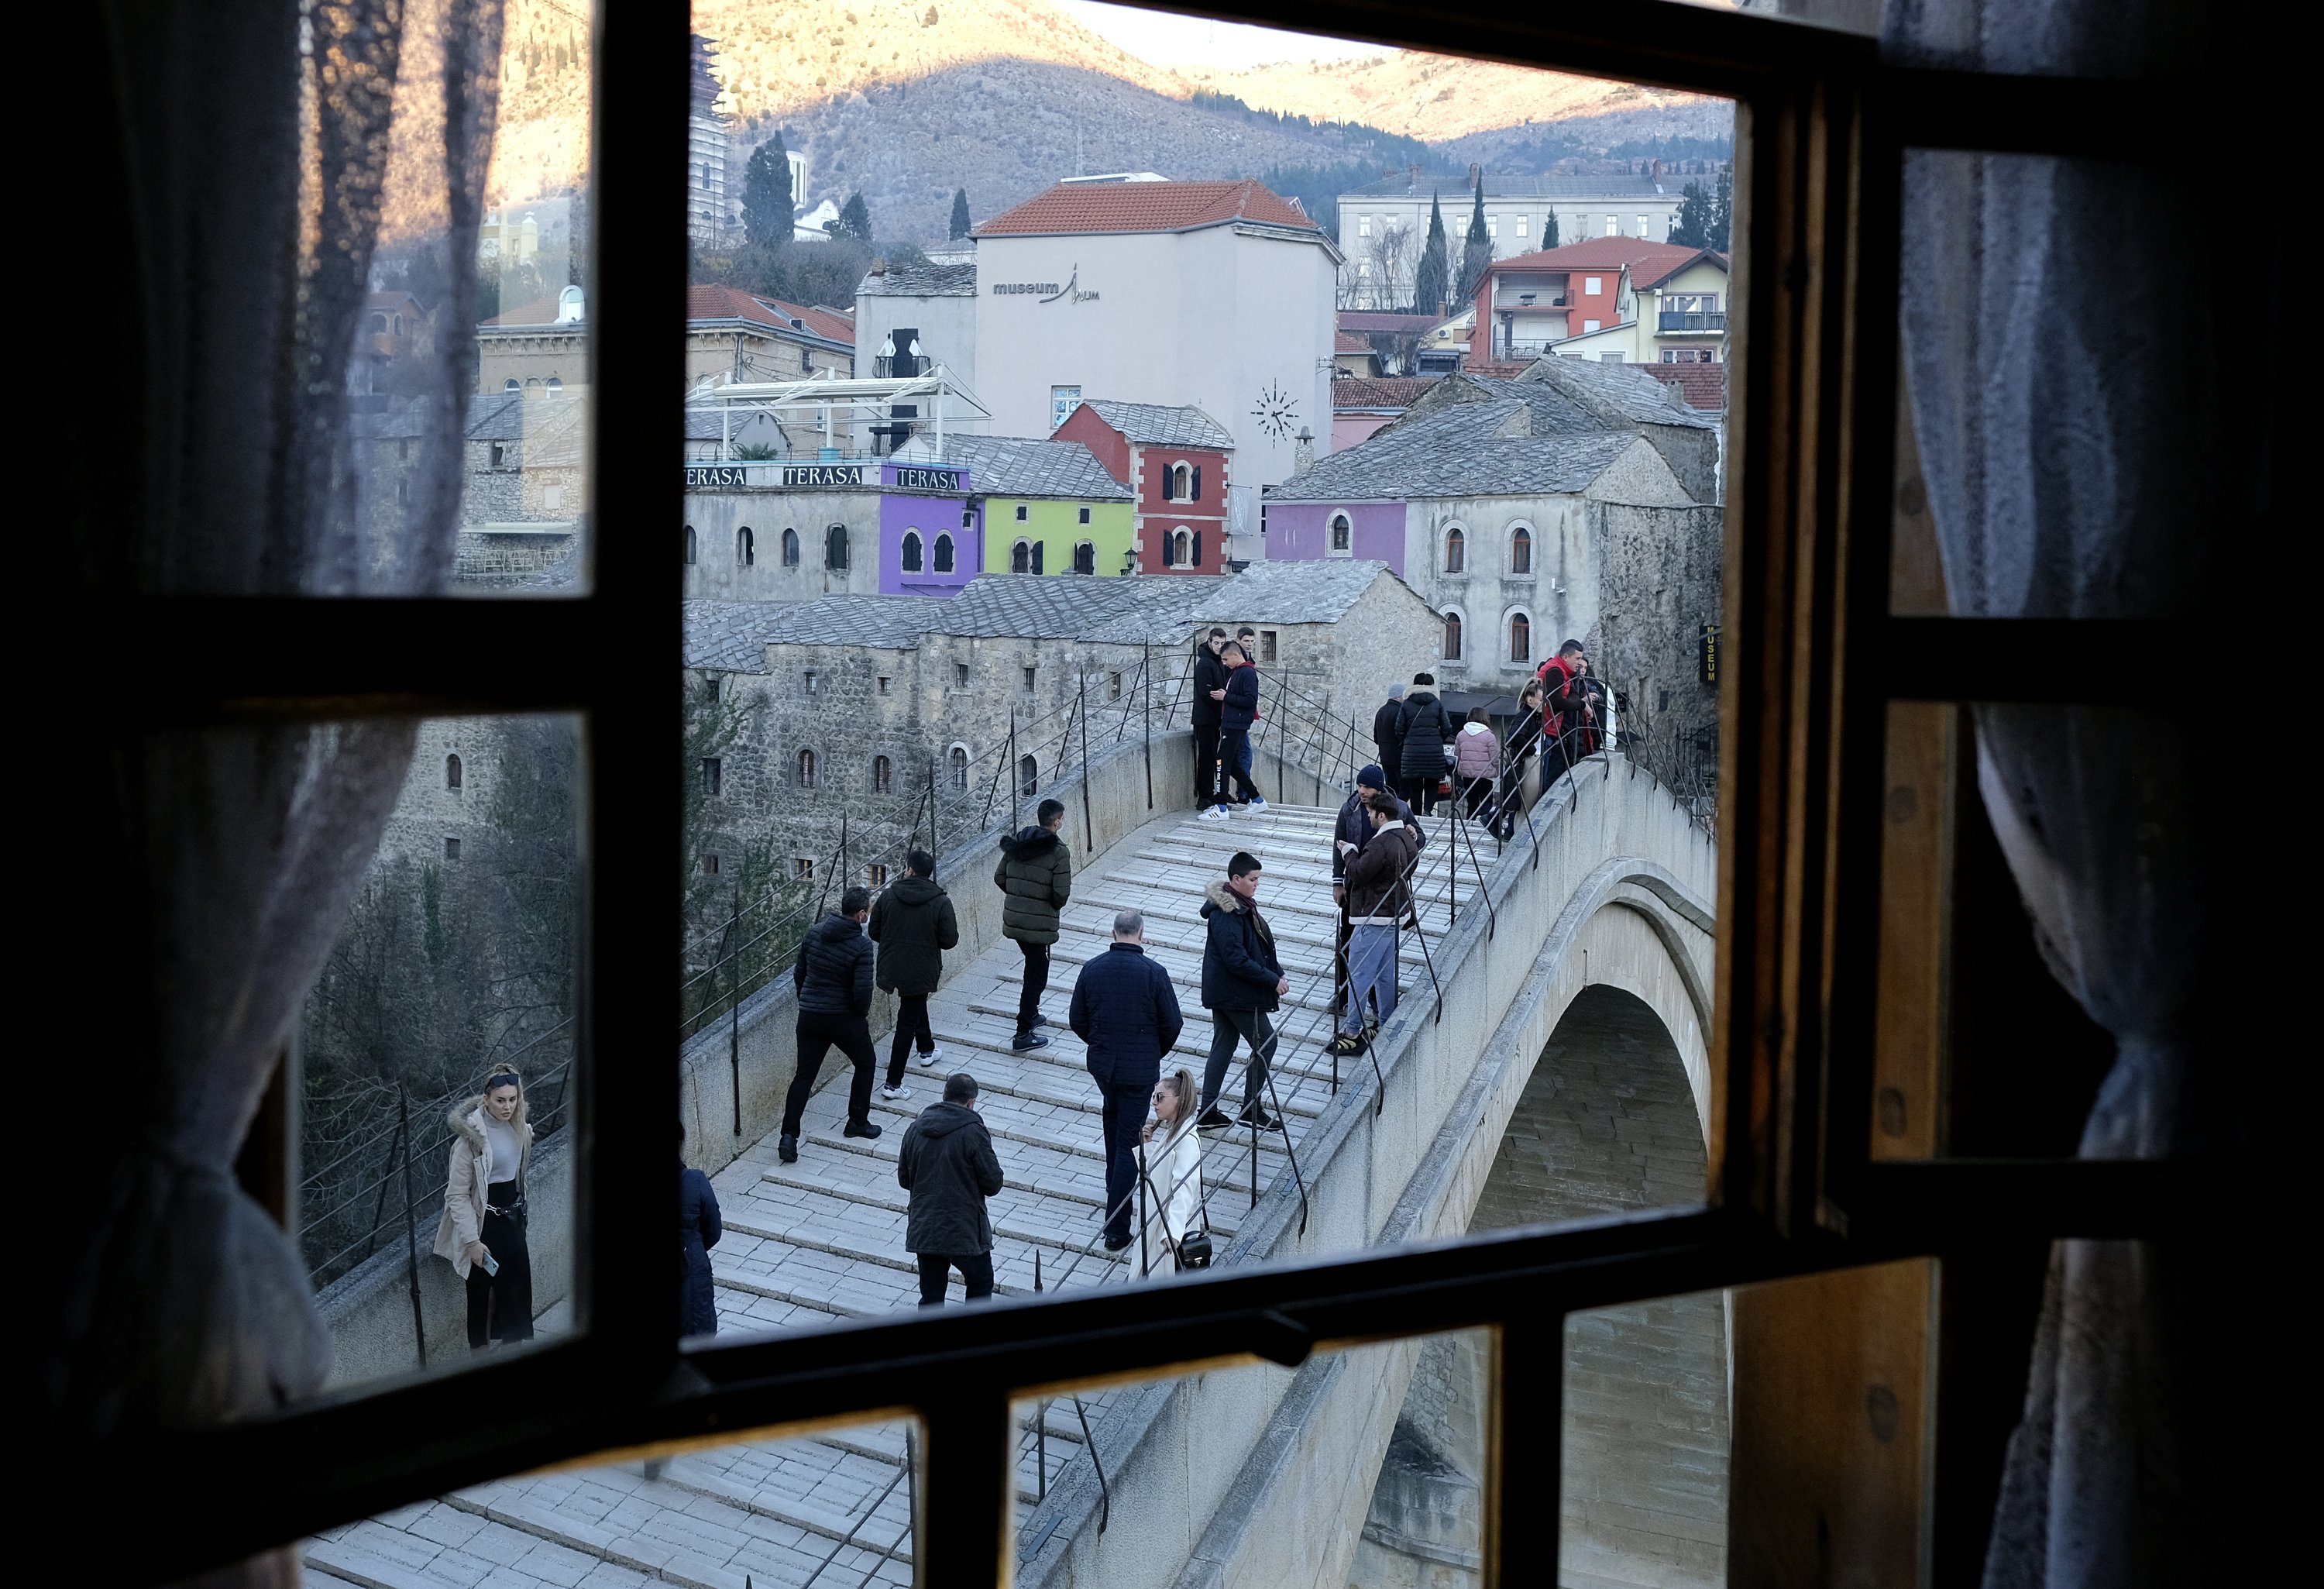 The Bosnian town of Mostar is holding its first local elections in 12 years